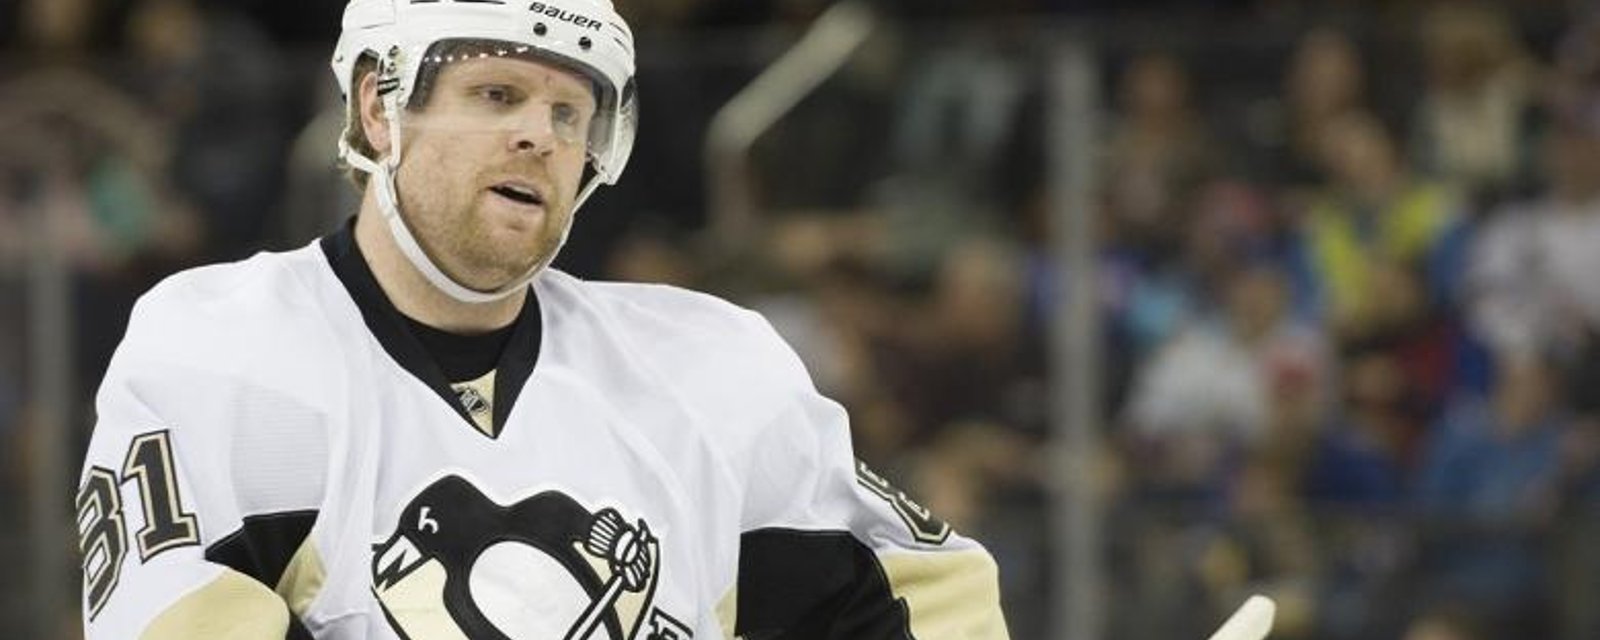 Kessel hilariously trolled by teammates after interview blooper.